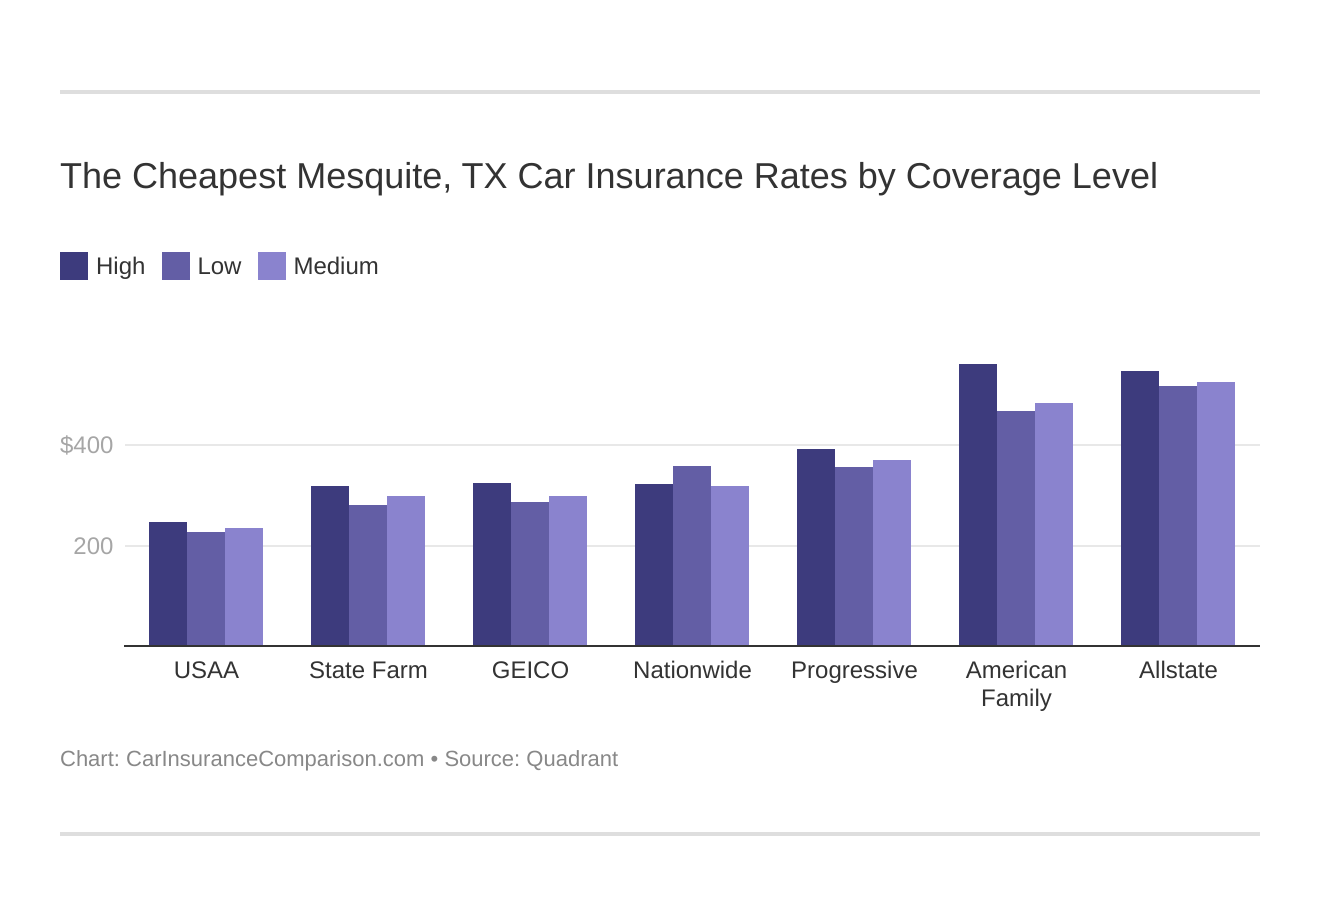 The Cheapest Mesquite, TX Car Insurance Rates by Coverage Level